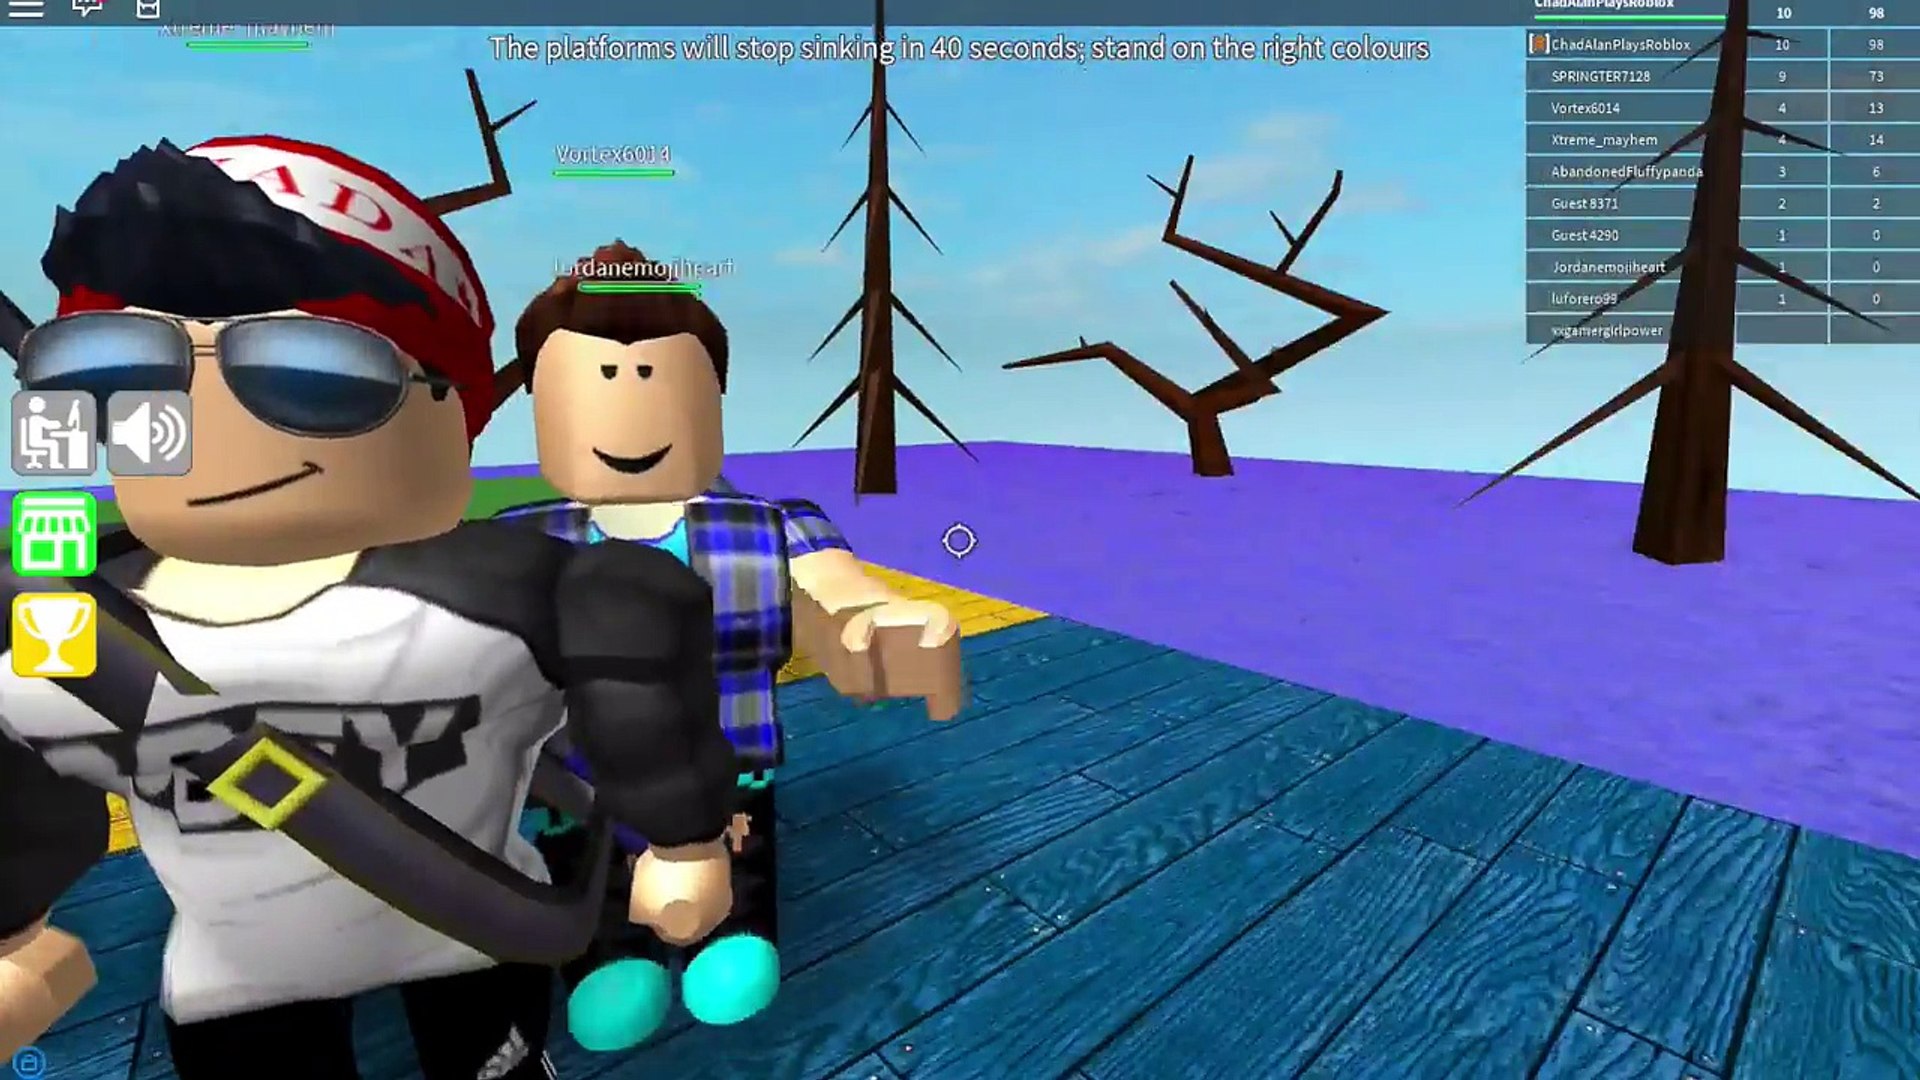 Roblox Epic Mini Games I Love This One Gamer Chad Plays